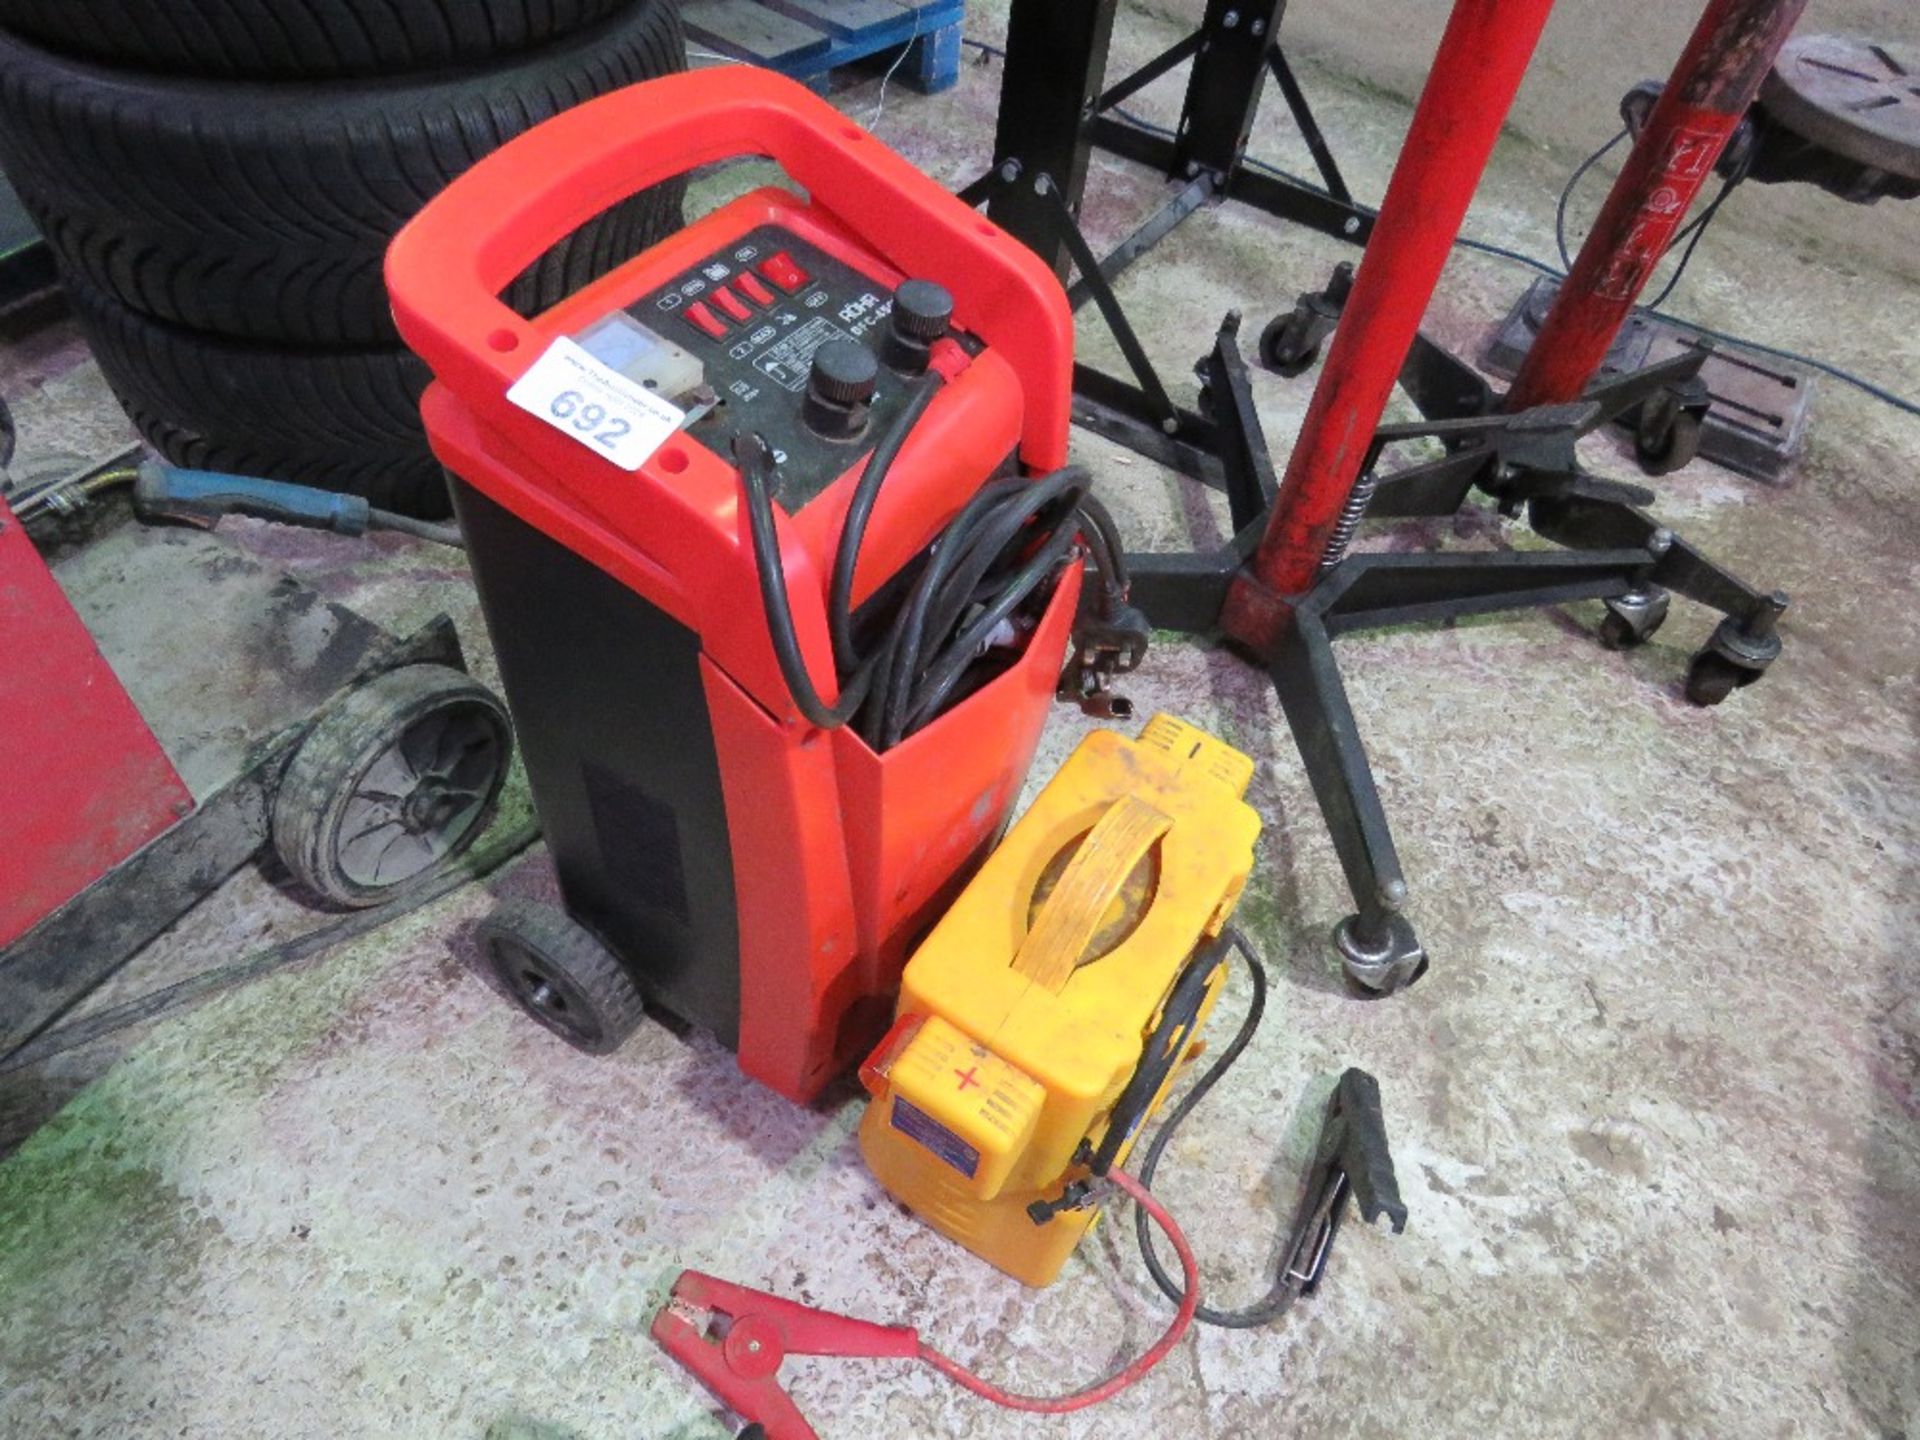 ROHR 12/24 VOLT BATTERY CHARGER PLUS A JUMP STARTER UNIT. SOURCED FROM GARAGE COMPANY LIQUIDATION.